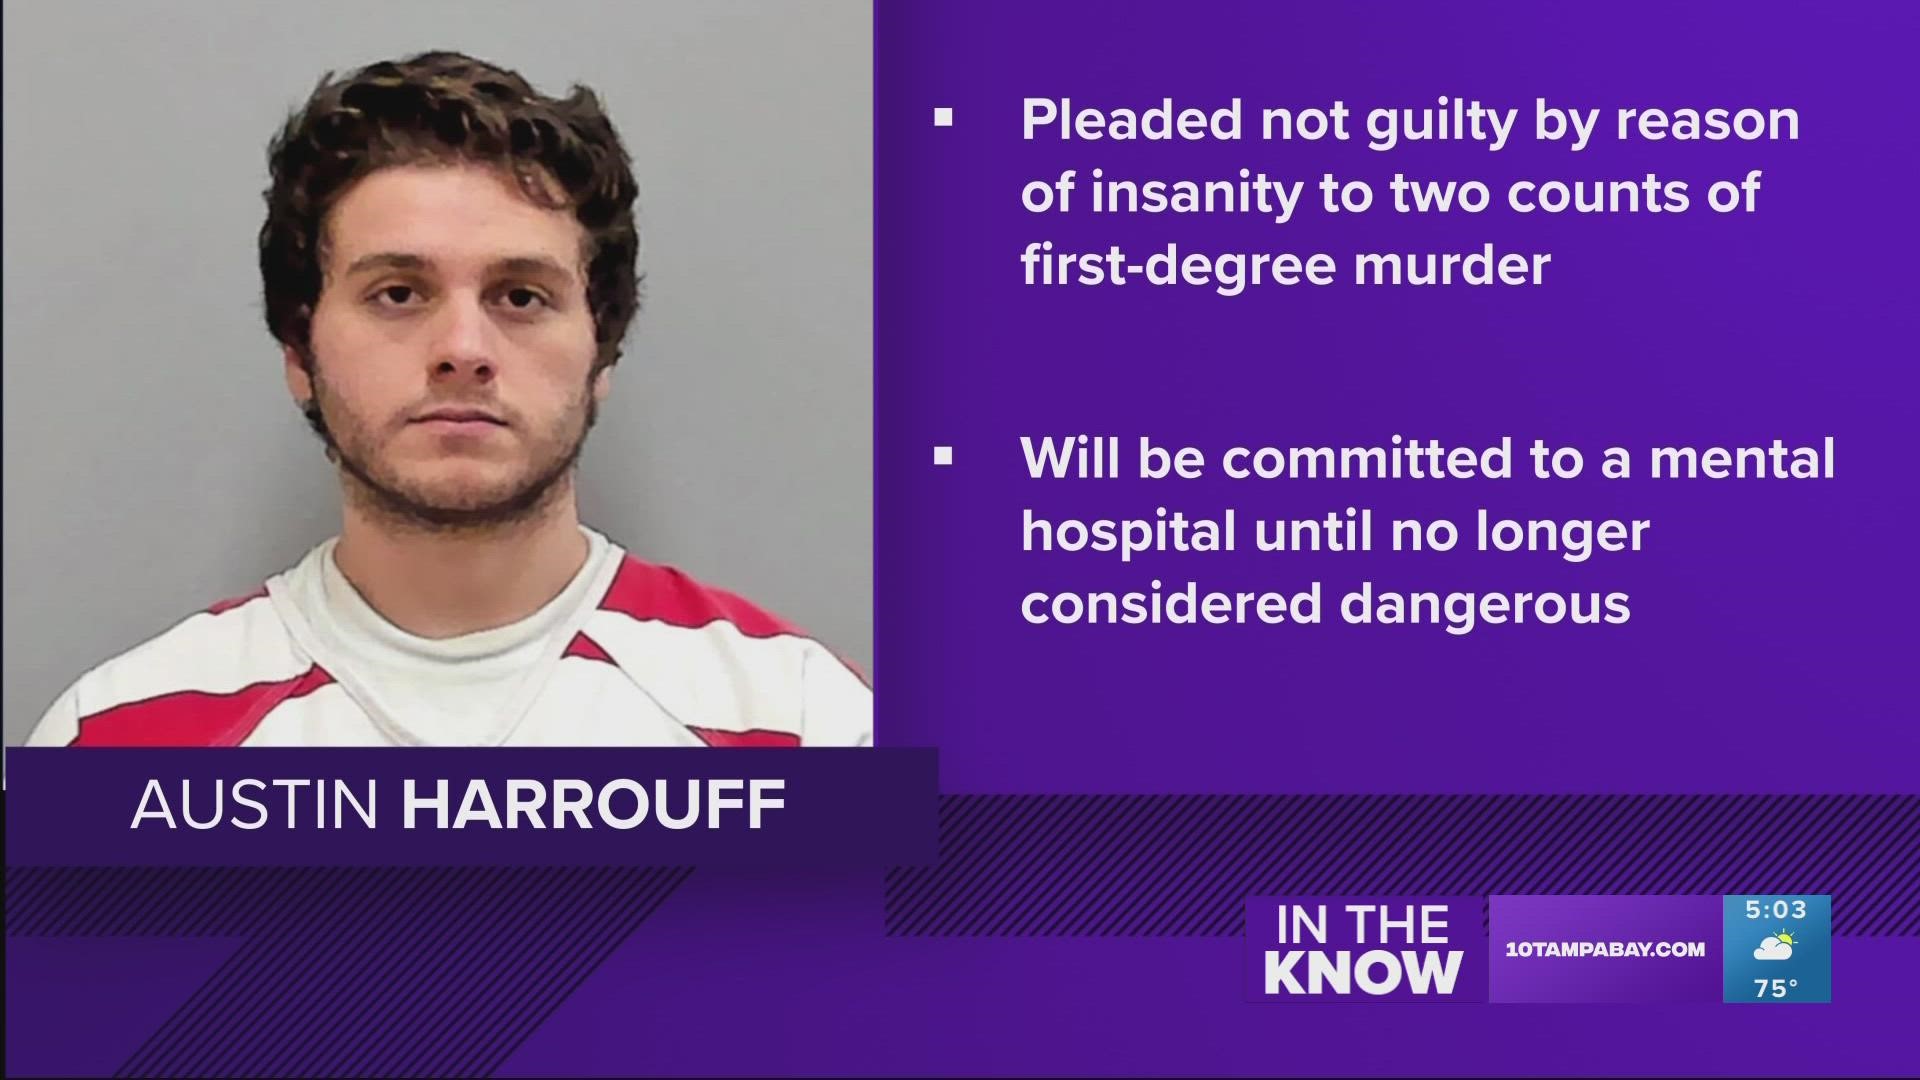 Austin Harrouff will be committed to a secure mental health facility until doctors and a judge agree that he is no longer dangerous.